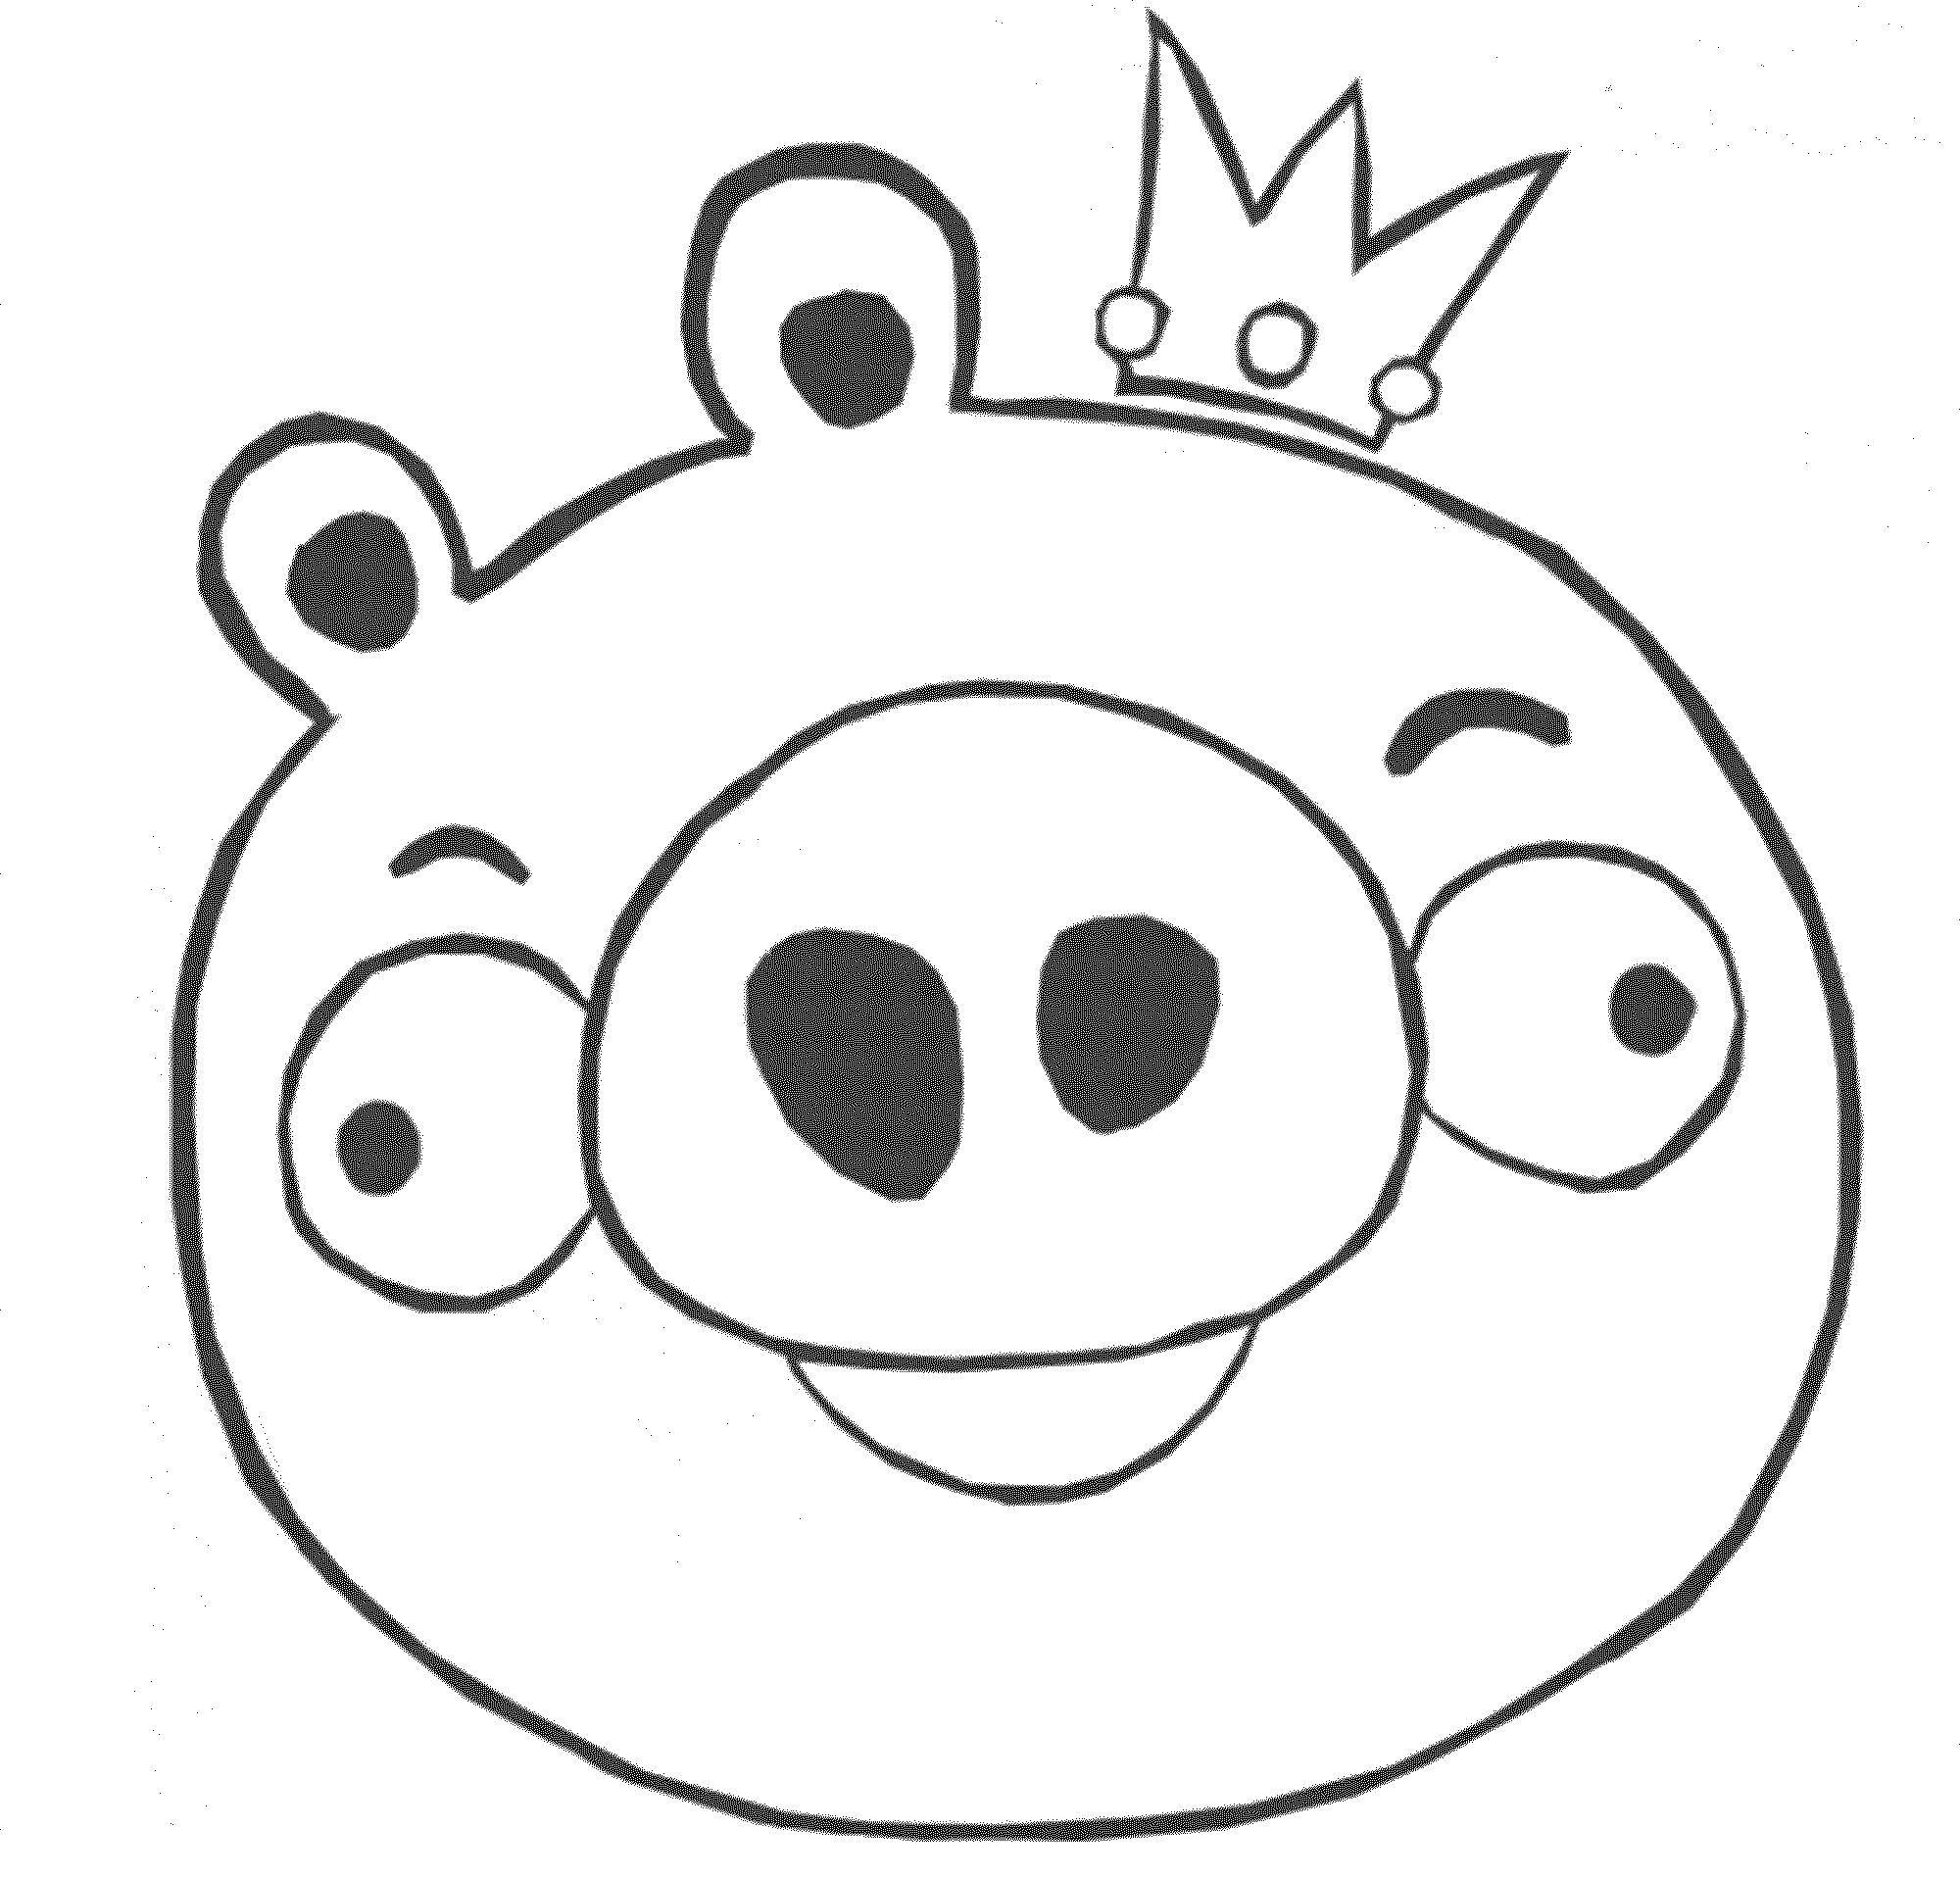 Coloring Pig with crown. Category angry birds. Tags:  angry birds, pig, crown.